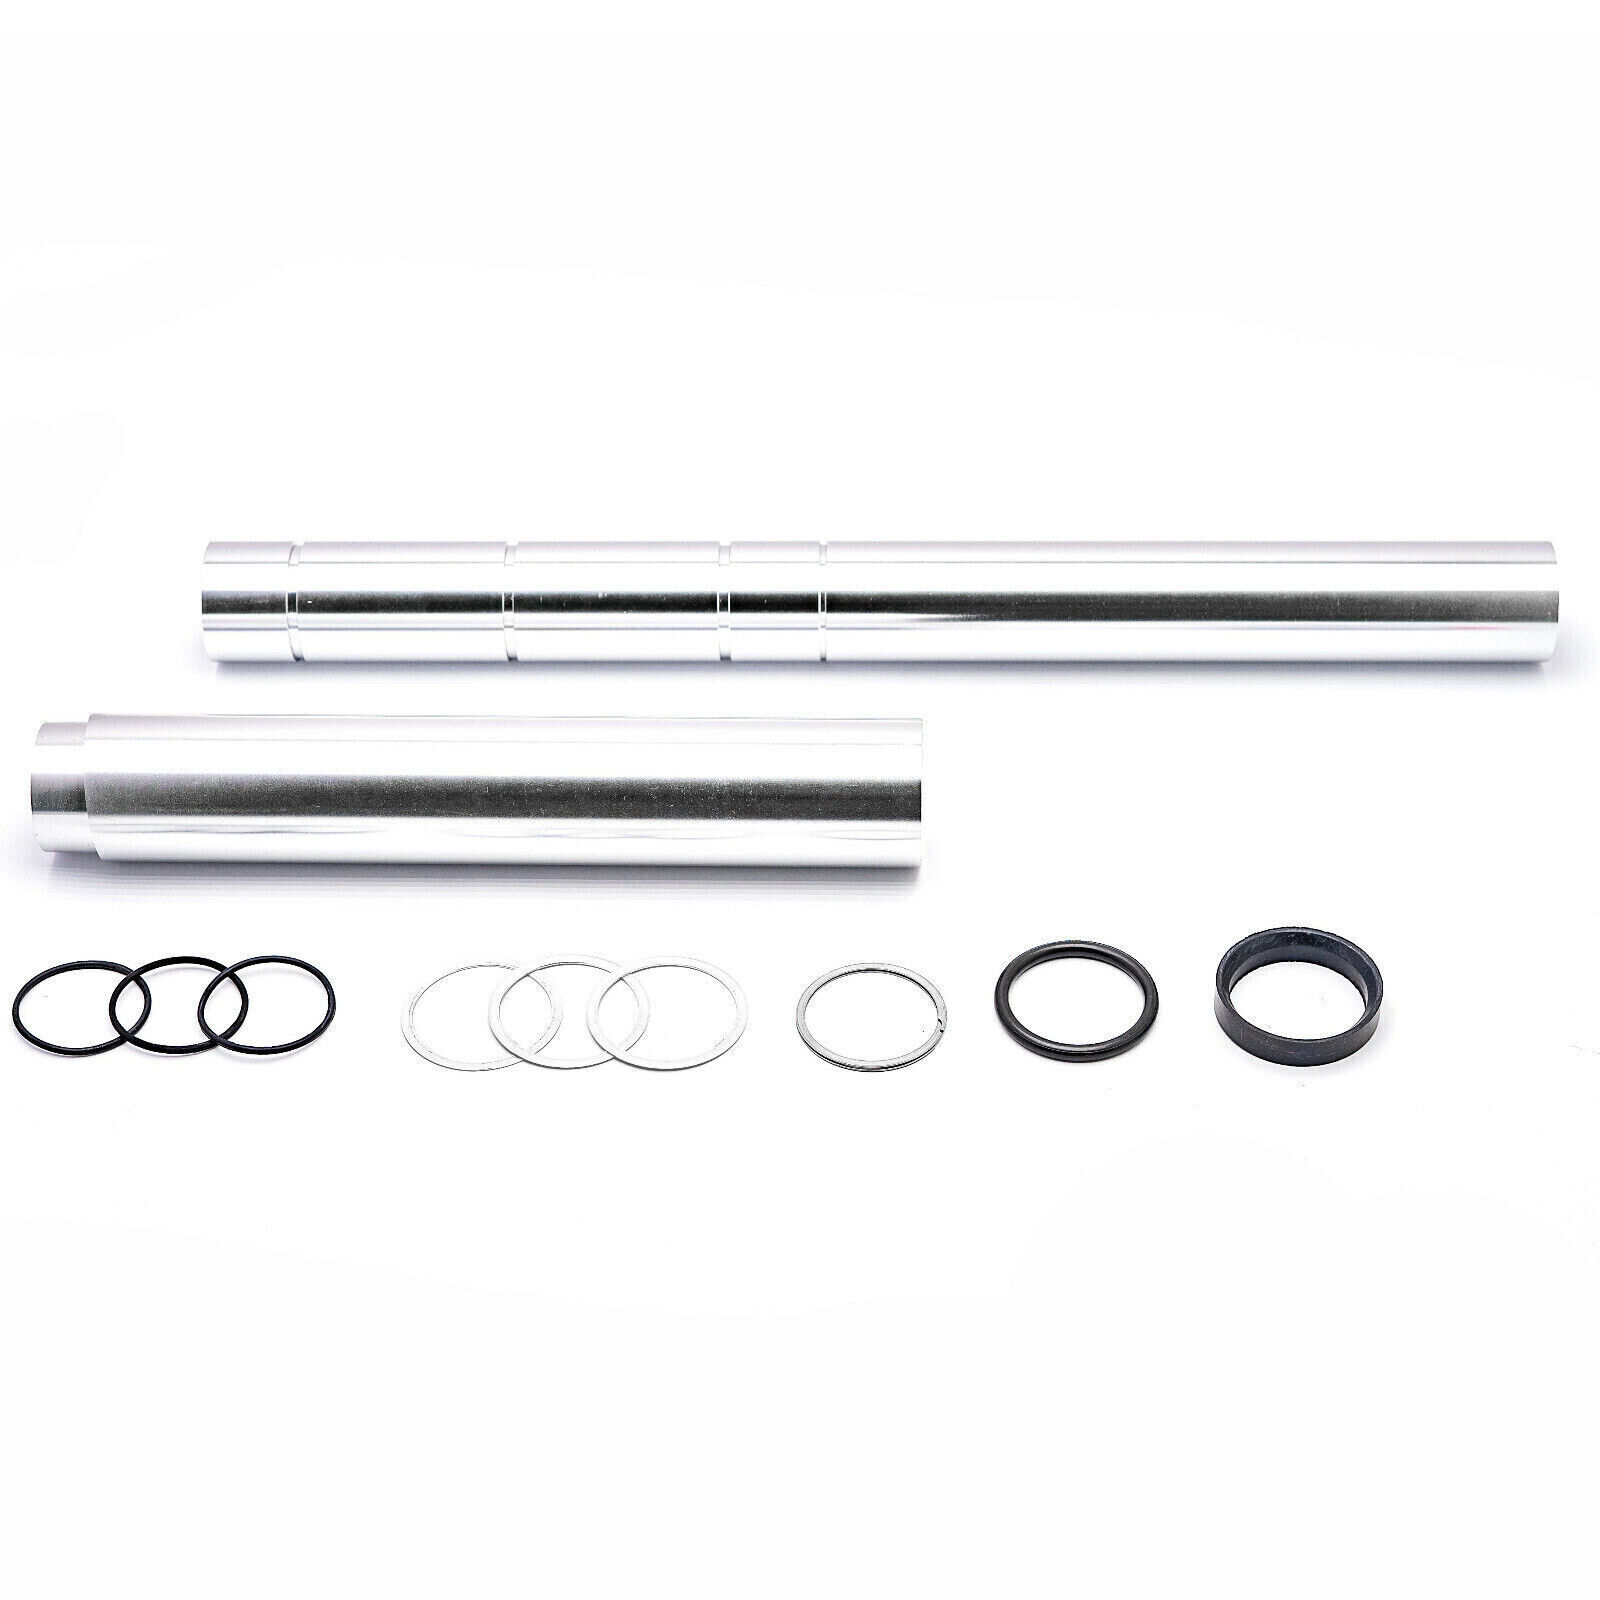 NEW Collapsible Coolant Water Transfer Pipe Kit 11141439975 for BMW 545i 650i X5